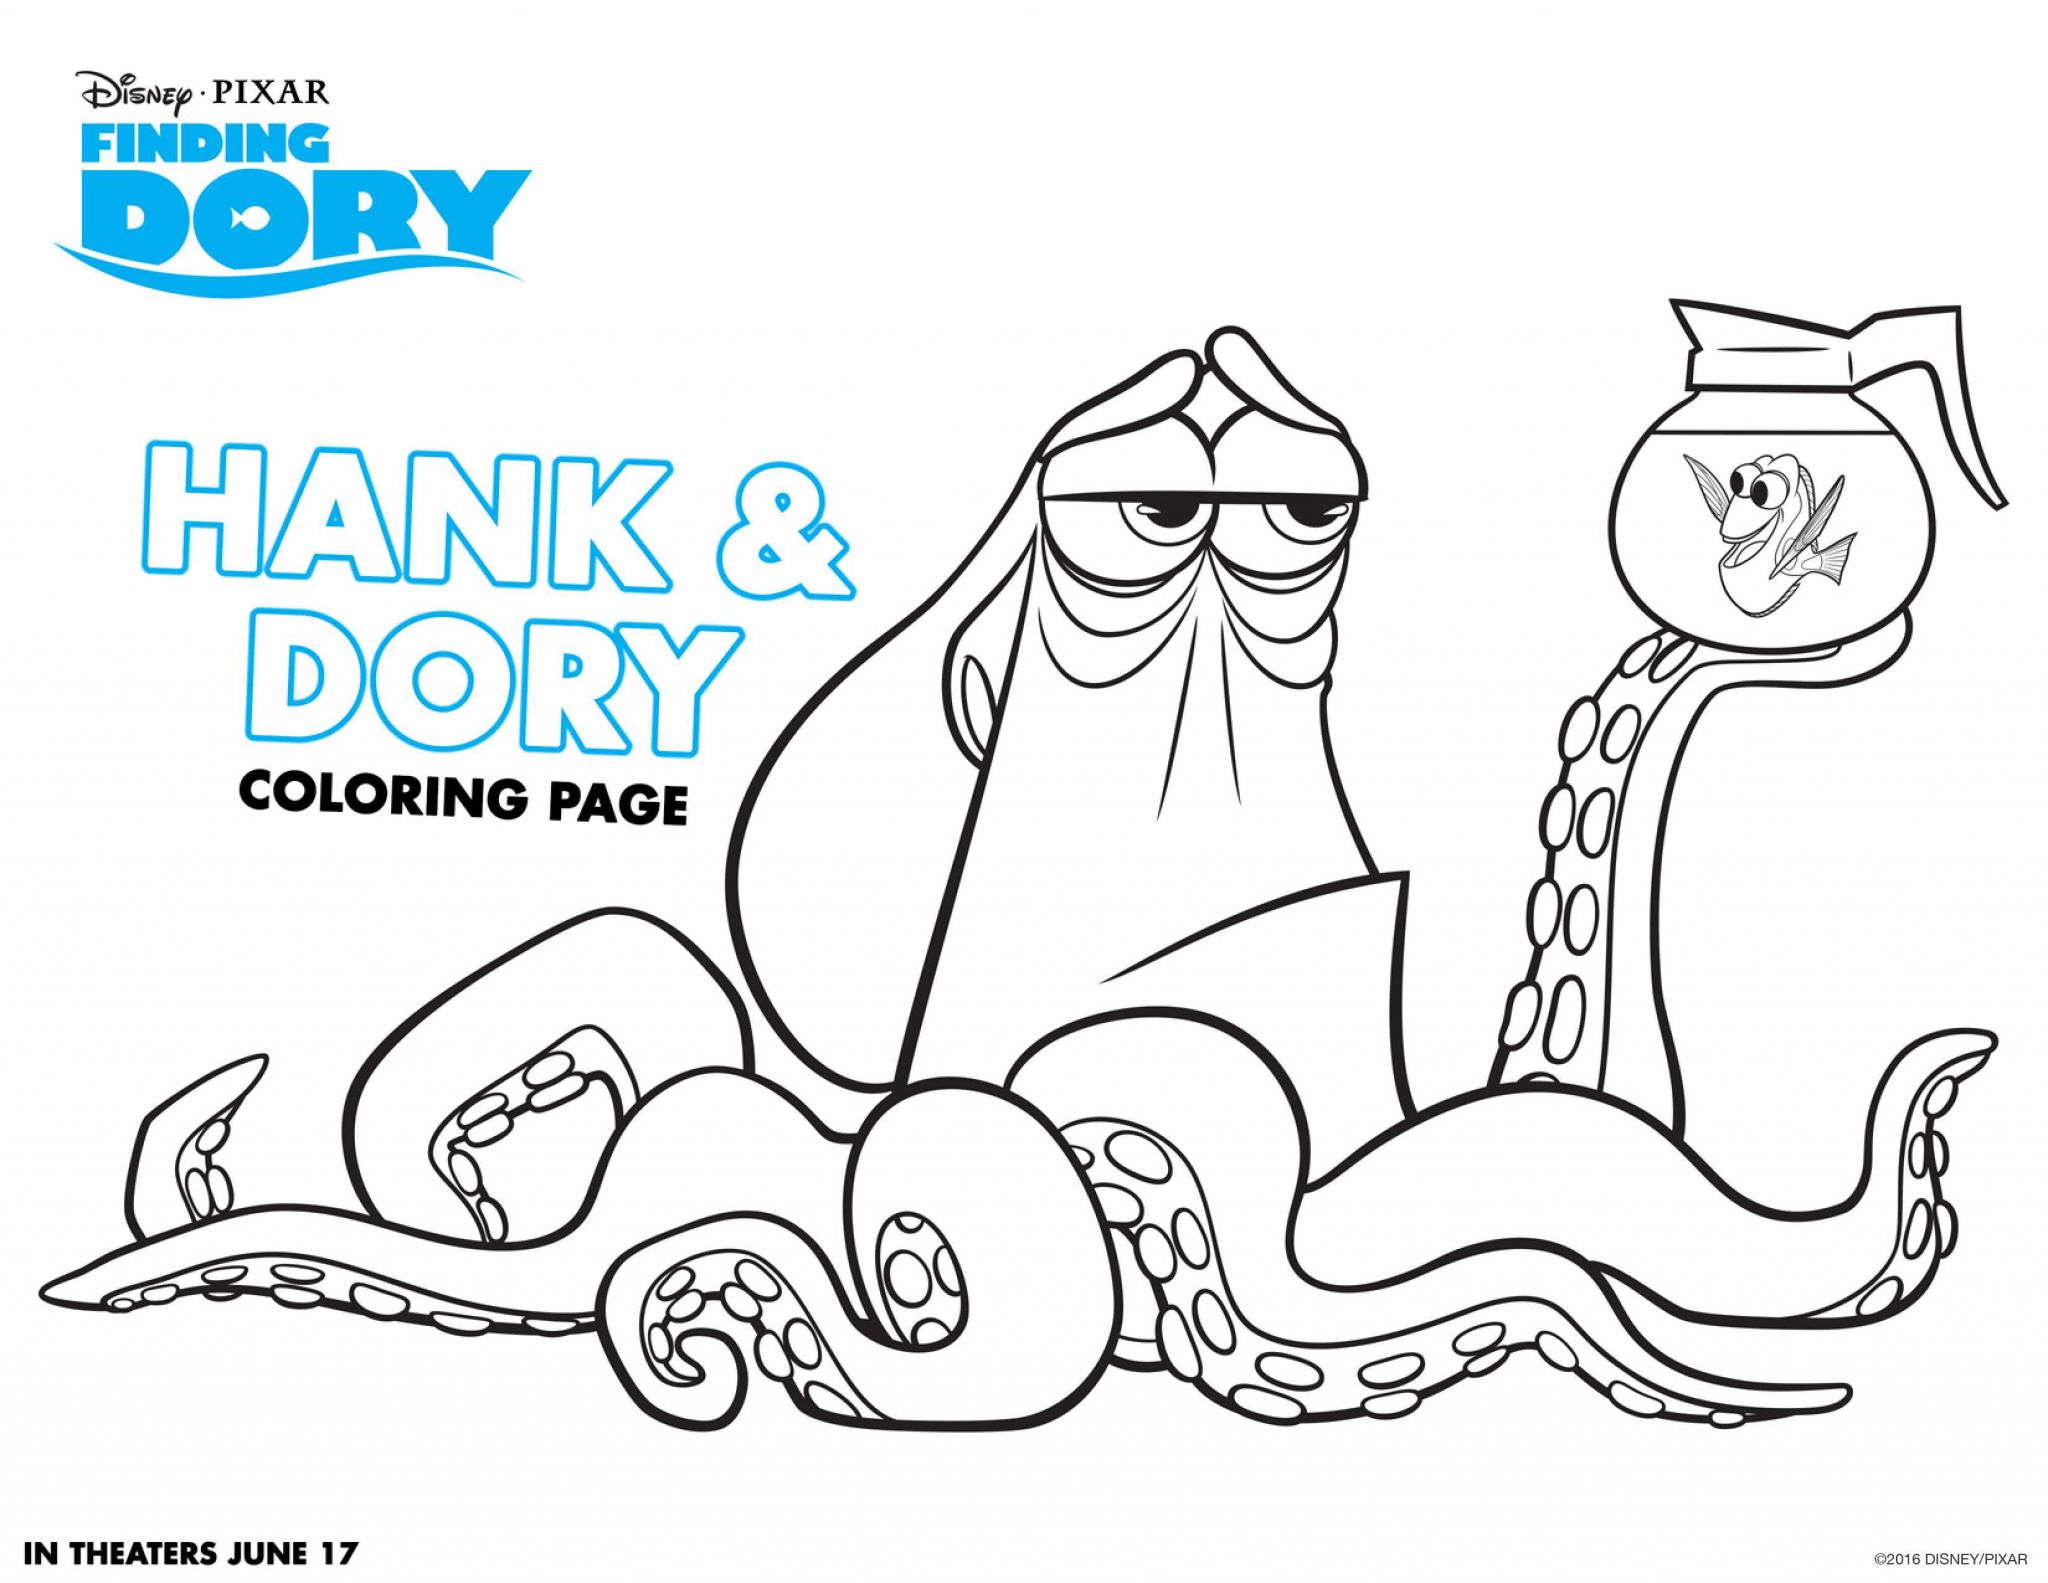 Finding Nemo Worksheet Also Finding Dory Coloring Sheets Dory Party by Debby Smith